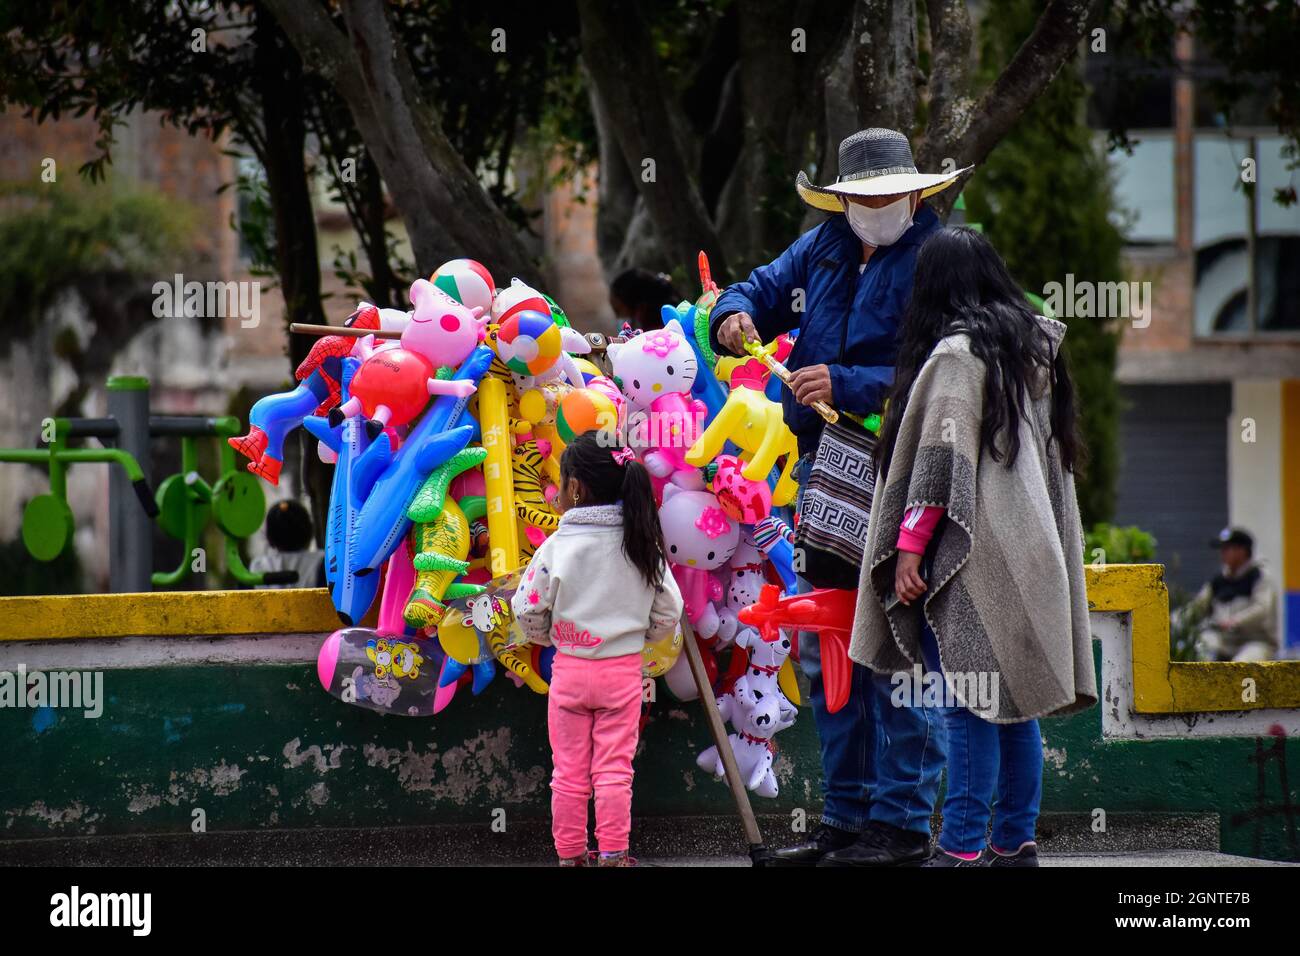 A mom and her daughter buy rubber balloons and toys to a street vendor in Cumbal - Nariño, Colombia on August 15, 2021. Stock Photo